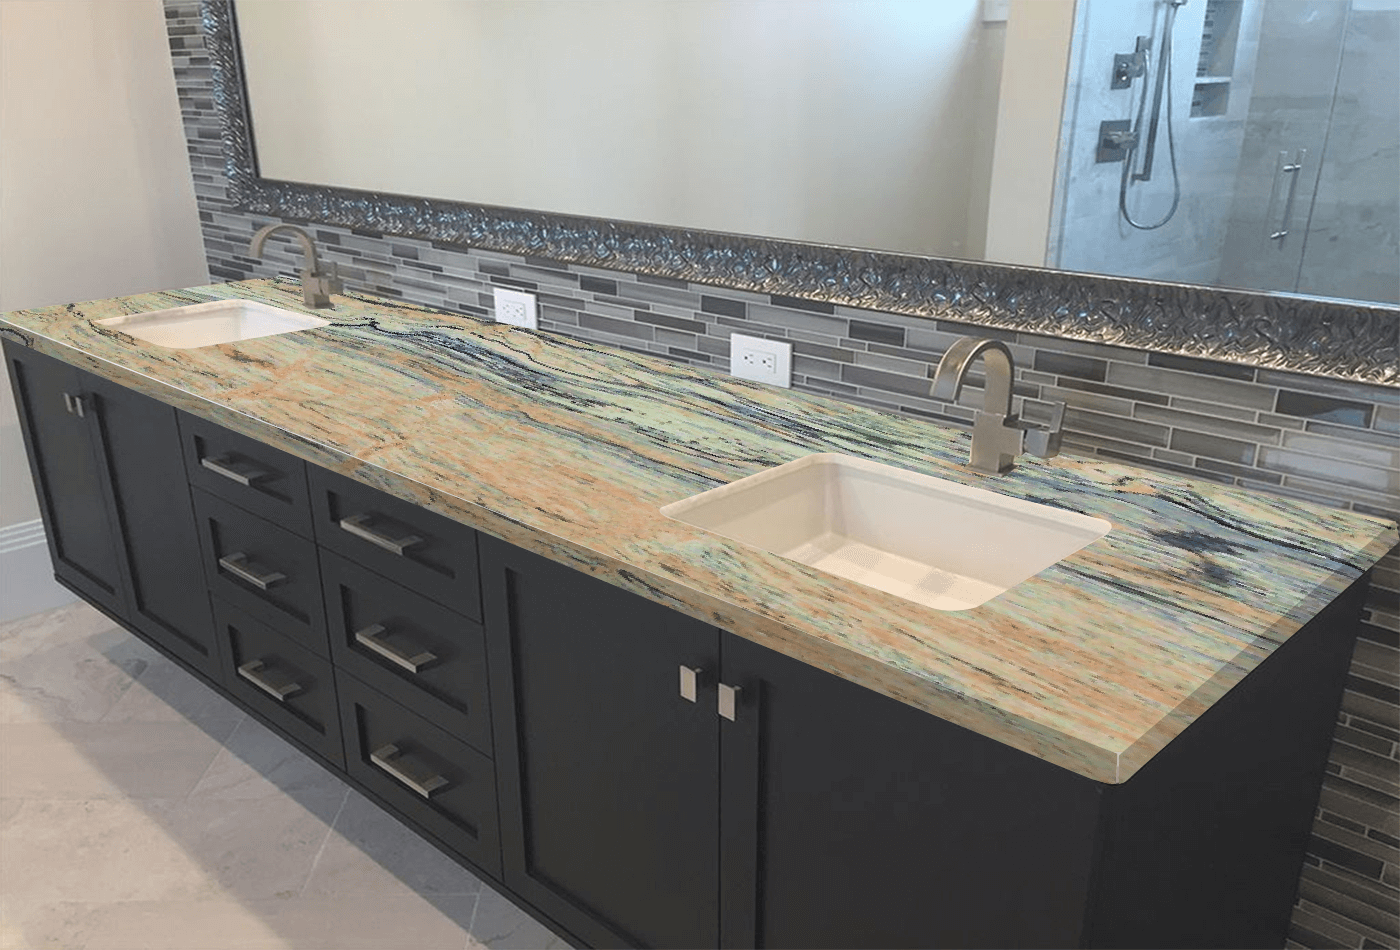 Bring Out Some Exciting Bathroom Countertops with this Gold Granite